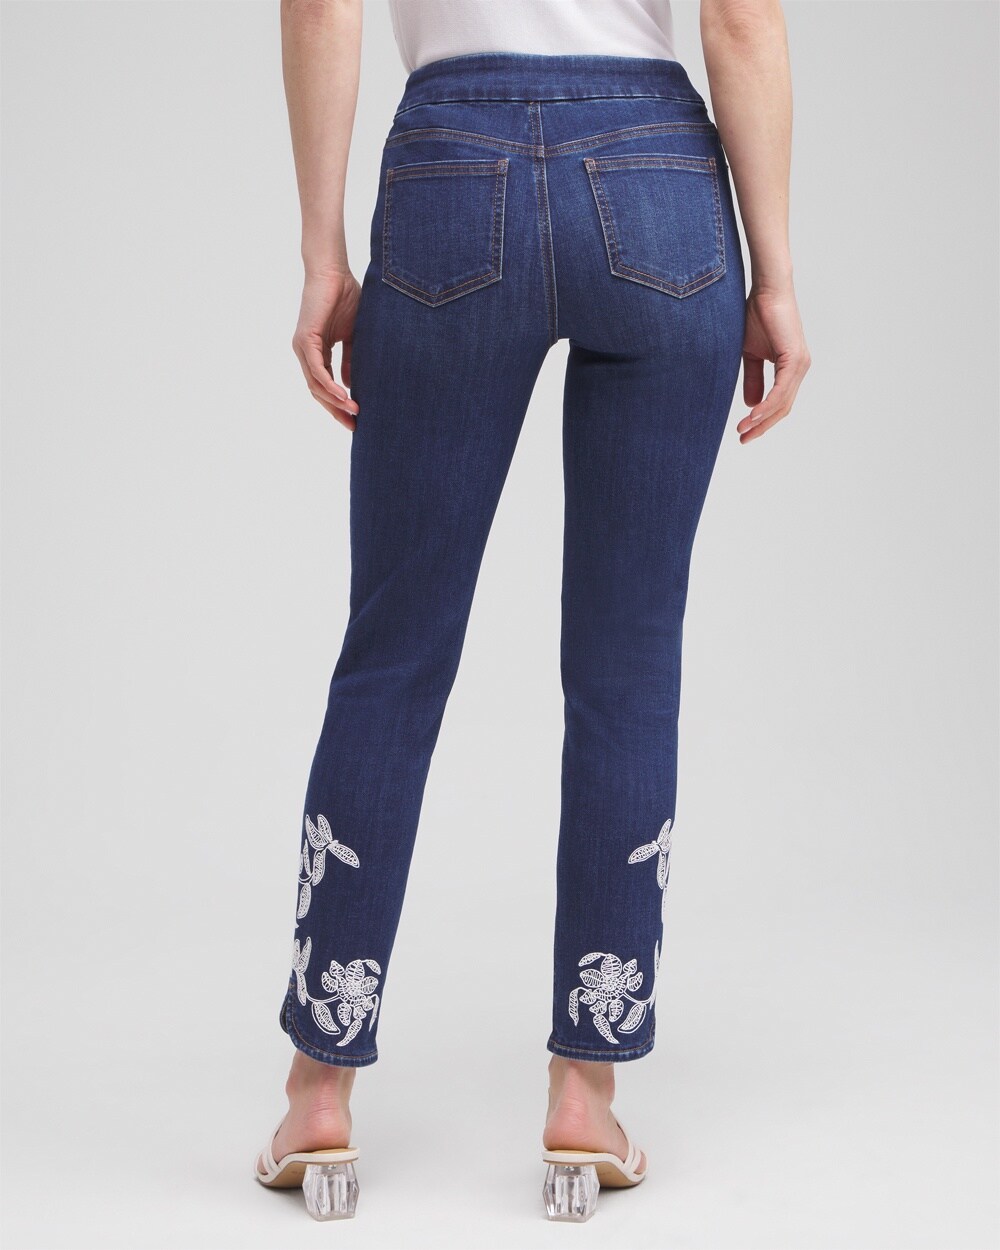 Embroidered Pull-on Ankle Jeggings - Chico's